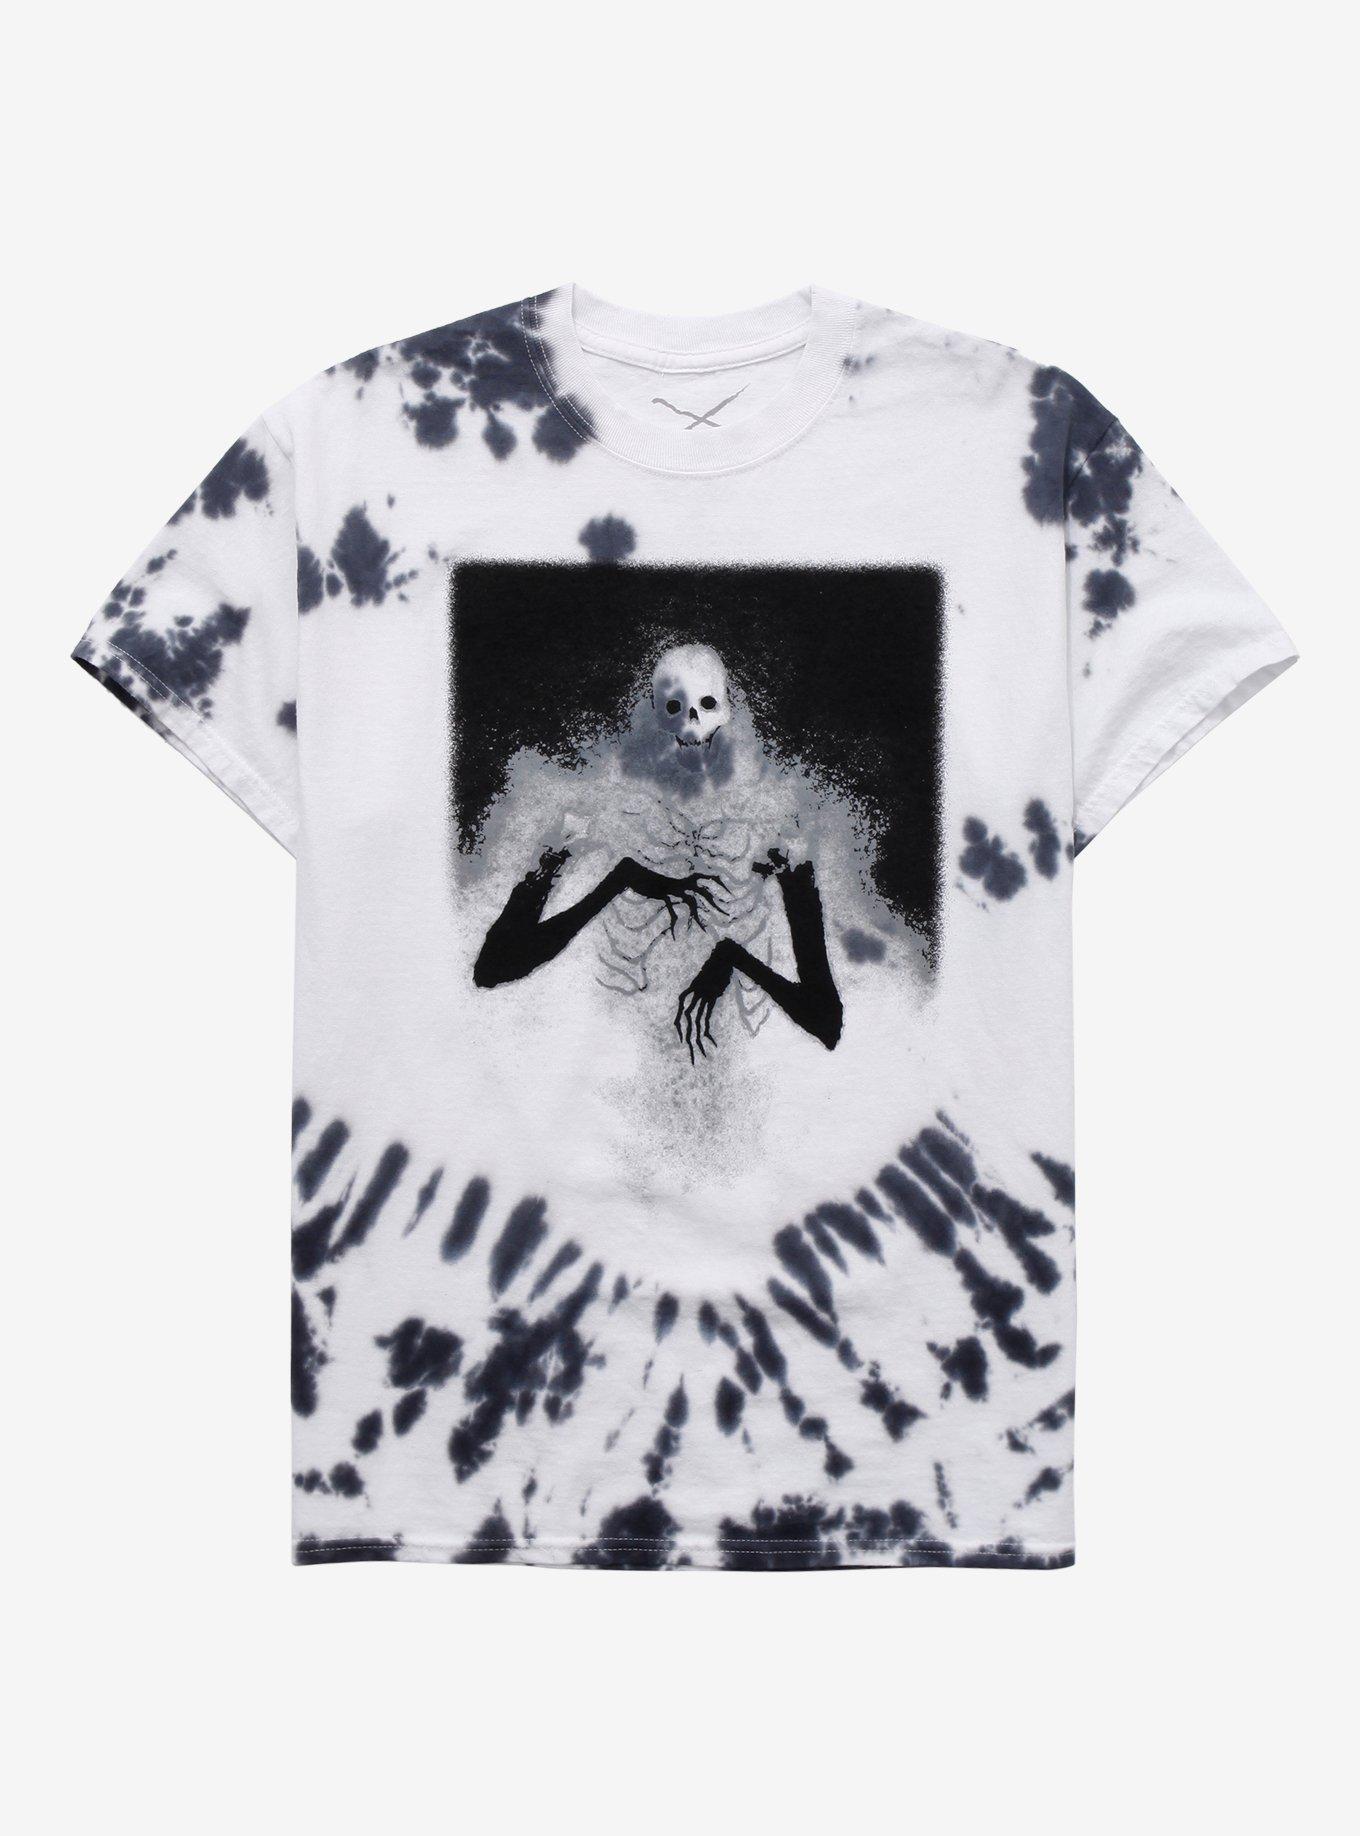 Mire Black & White Tie-Dye T-Shirt By Built From Sketch | Hot Topic